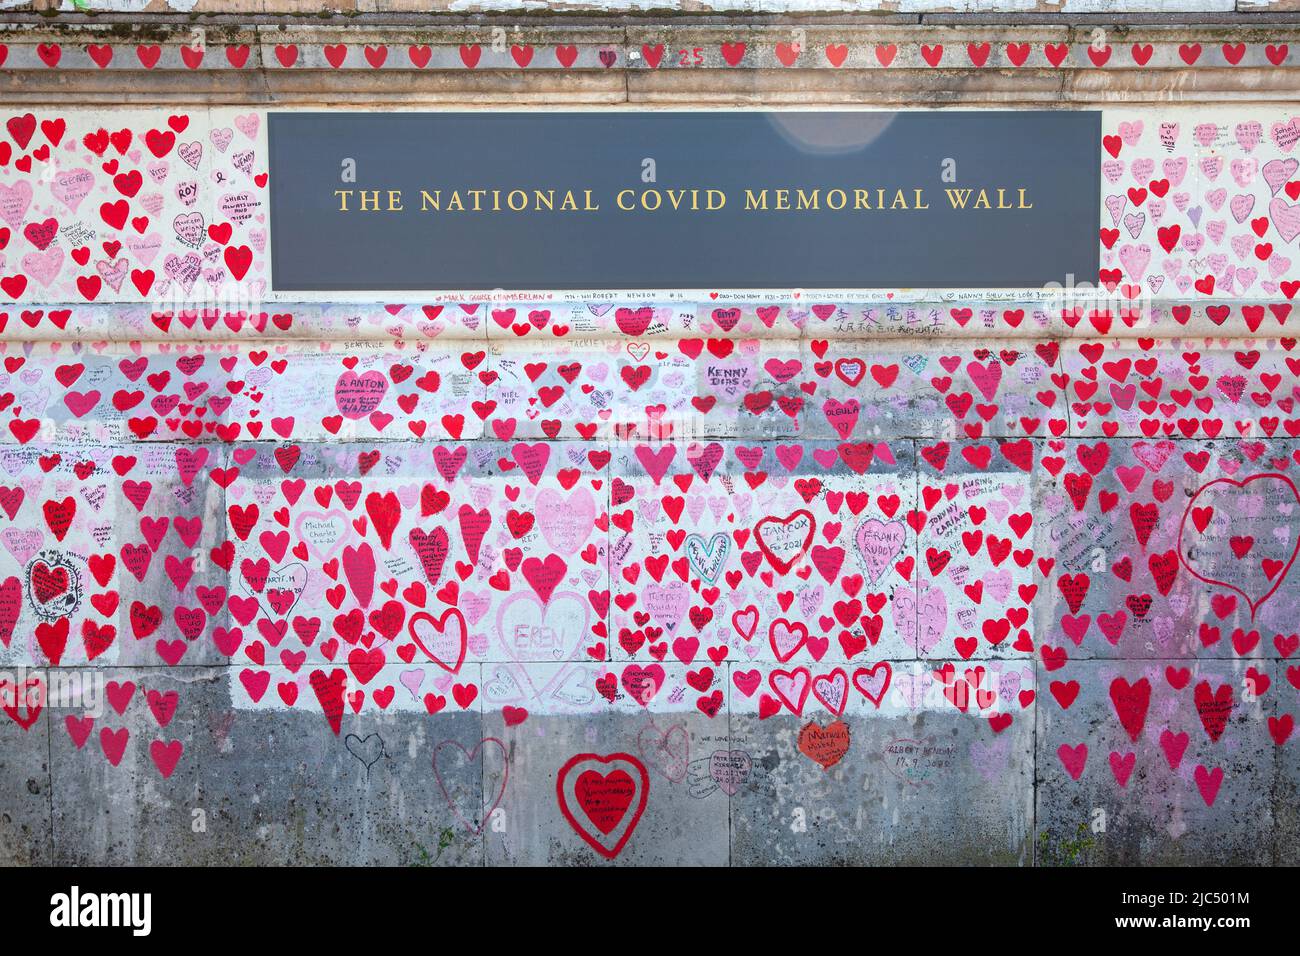 National Covid Memorial Wall on South Bank à Londres, Royaume-Uni Banque D'Images